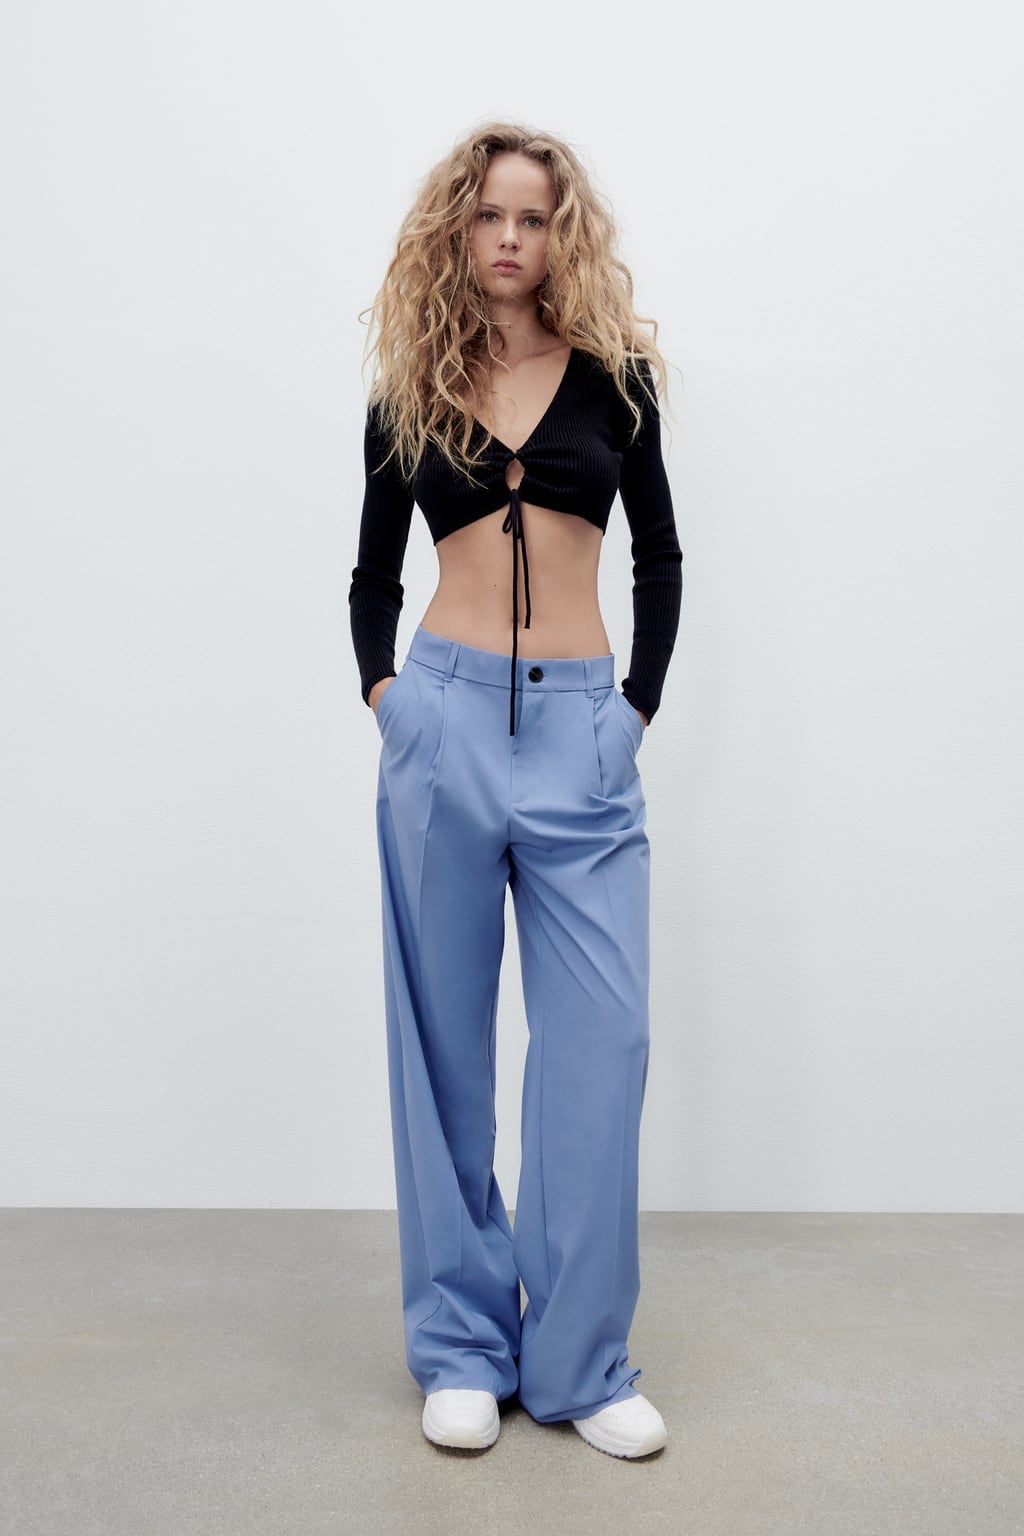 Colourful Pants: Zara Full Length Pants, 11 Tailored Trousers That Might  Just Be Worth a Denim Swap